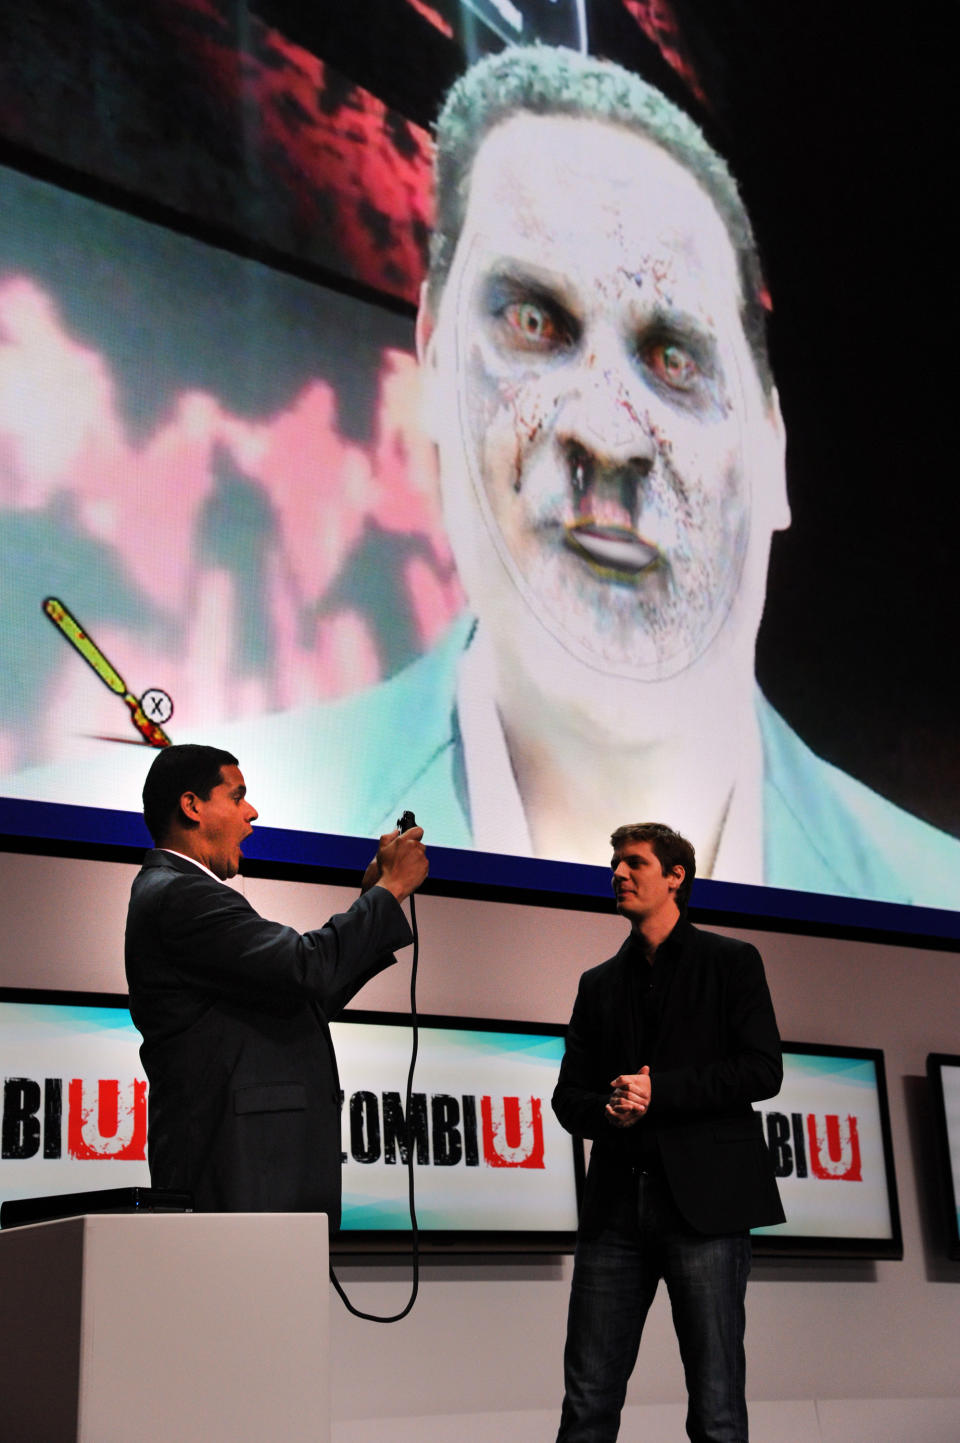 FILE - In this June 5, 2012 publicity file photo provided by Nintendo of America, Reggie Fils-Aime, Nintendo of America's President and Chief Operating Officer, left, tests out an interactive feature of "ZombiU," an upcoming Ubisoft game for the Wii U console, during the Nintendo All-Access Presentation at E3 2012 in Los Angeles. Using facial recognition, the feature transforms the player into a gruesome zombie. (AP Photo/Nintendo of America, Vince Bucci, File)